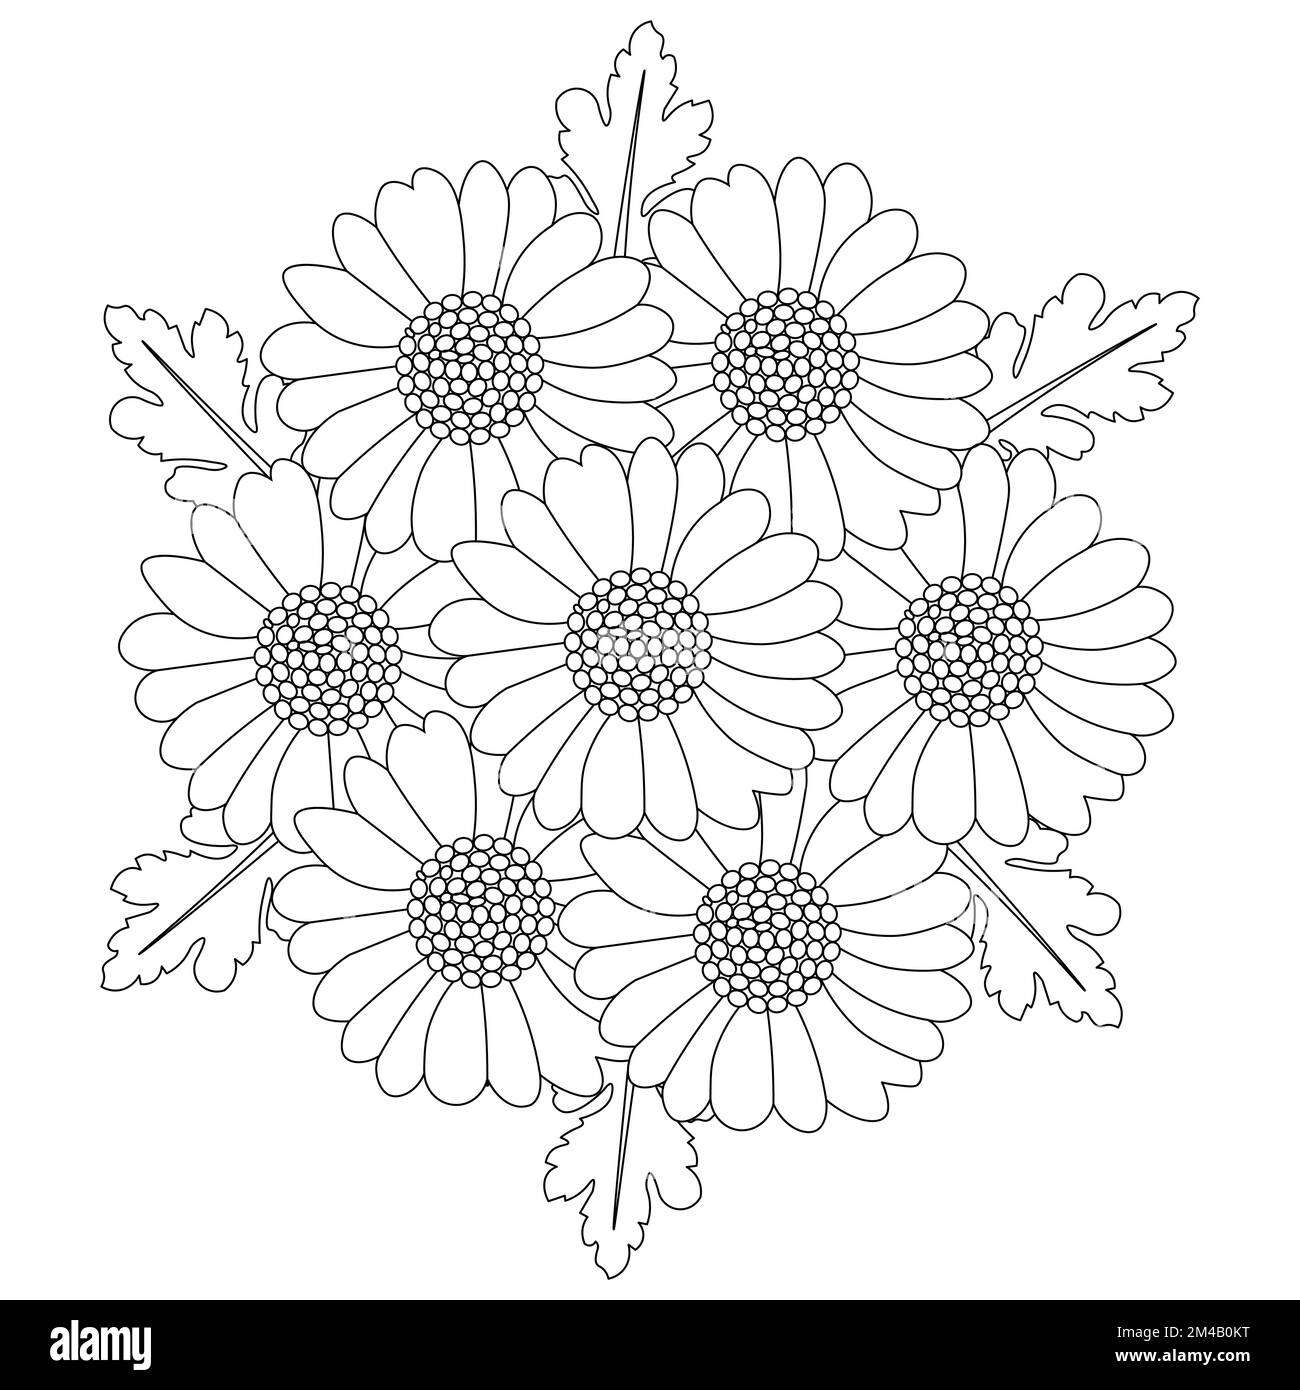 chamomile and daisy flower coloring page design with detailed line art vector graphic Stock Vector